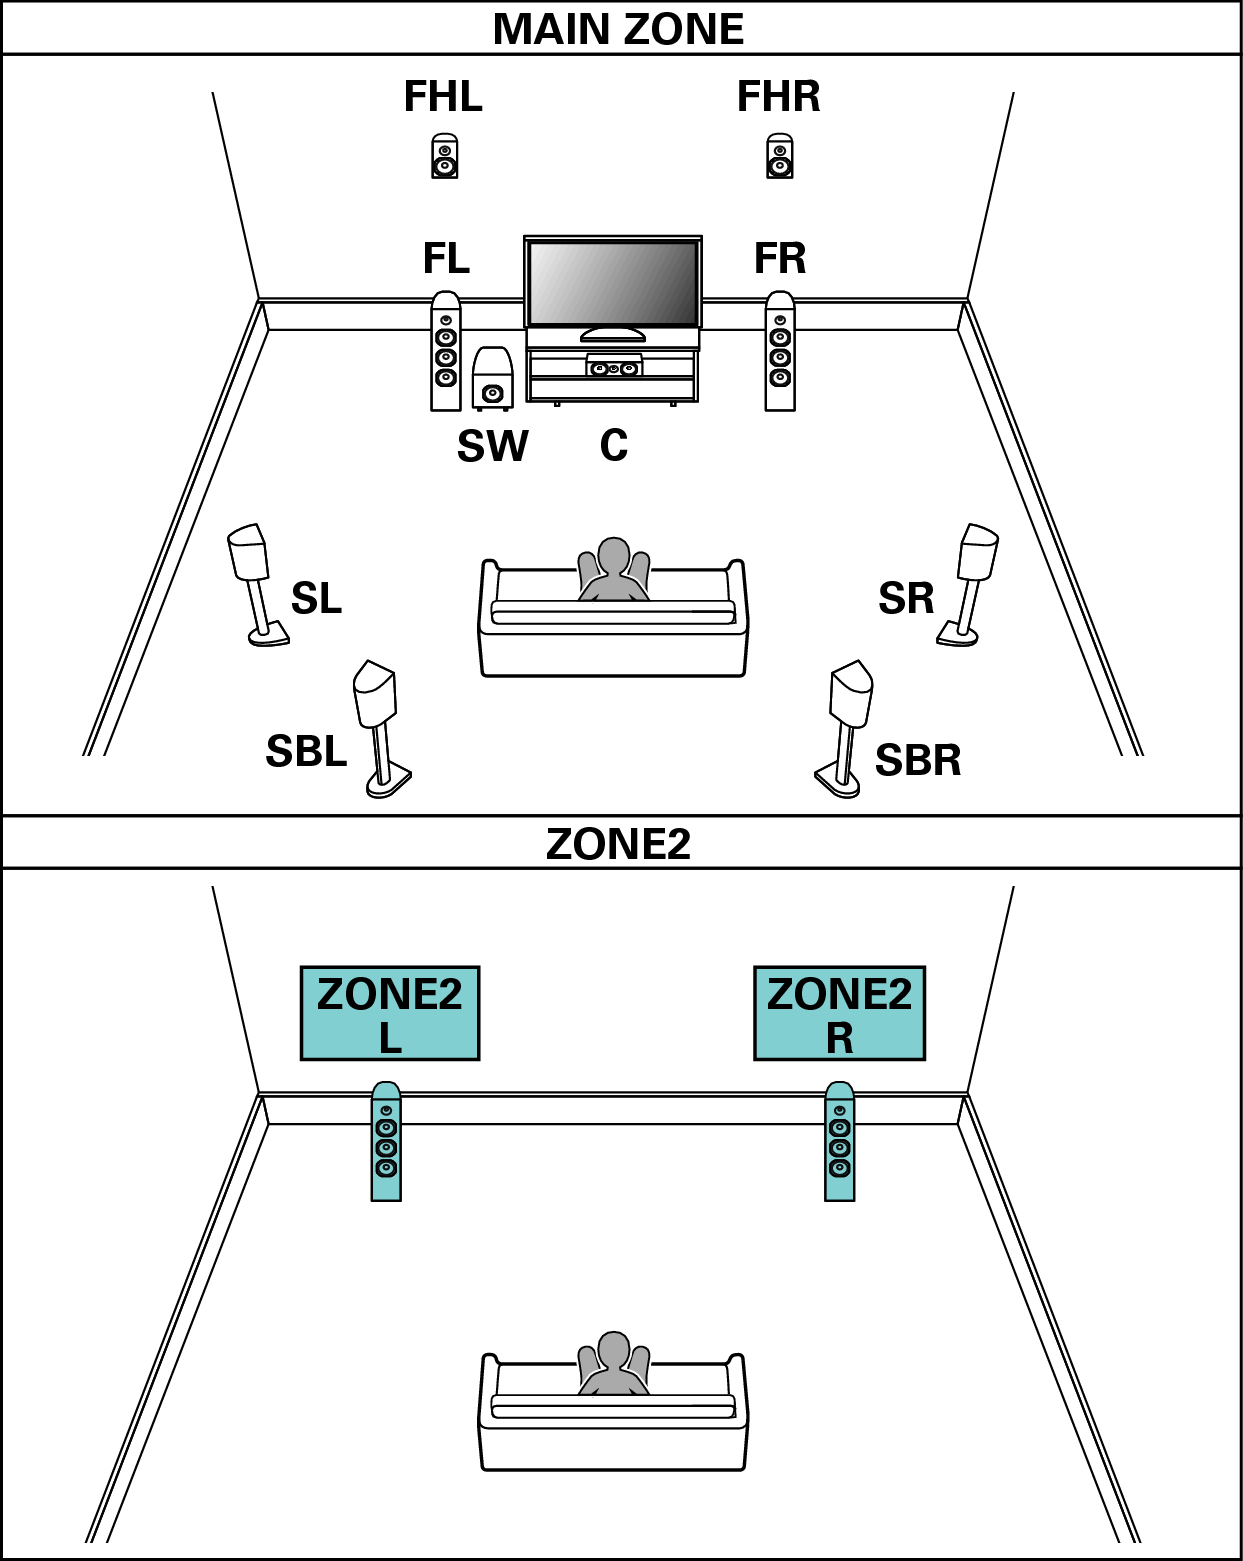 Connecting multi-zone speakers AVR-X6400H 4 channel amp 2 ohm wiring diagram 